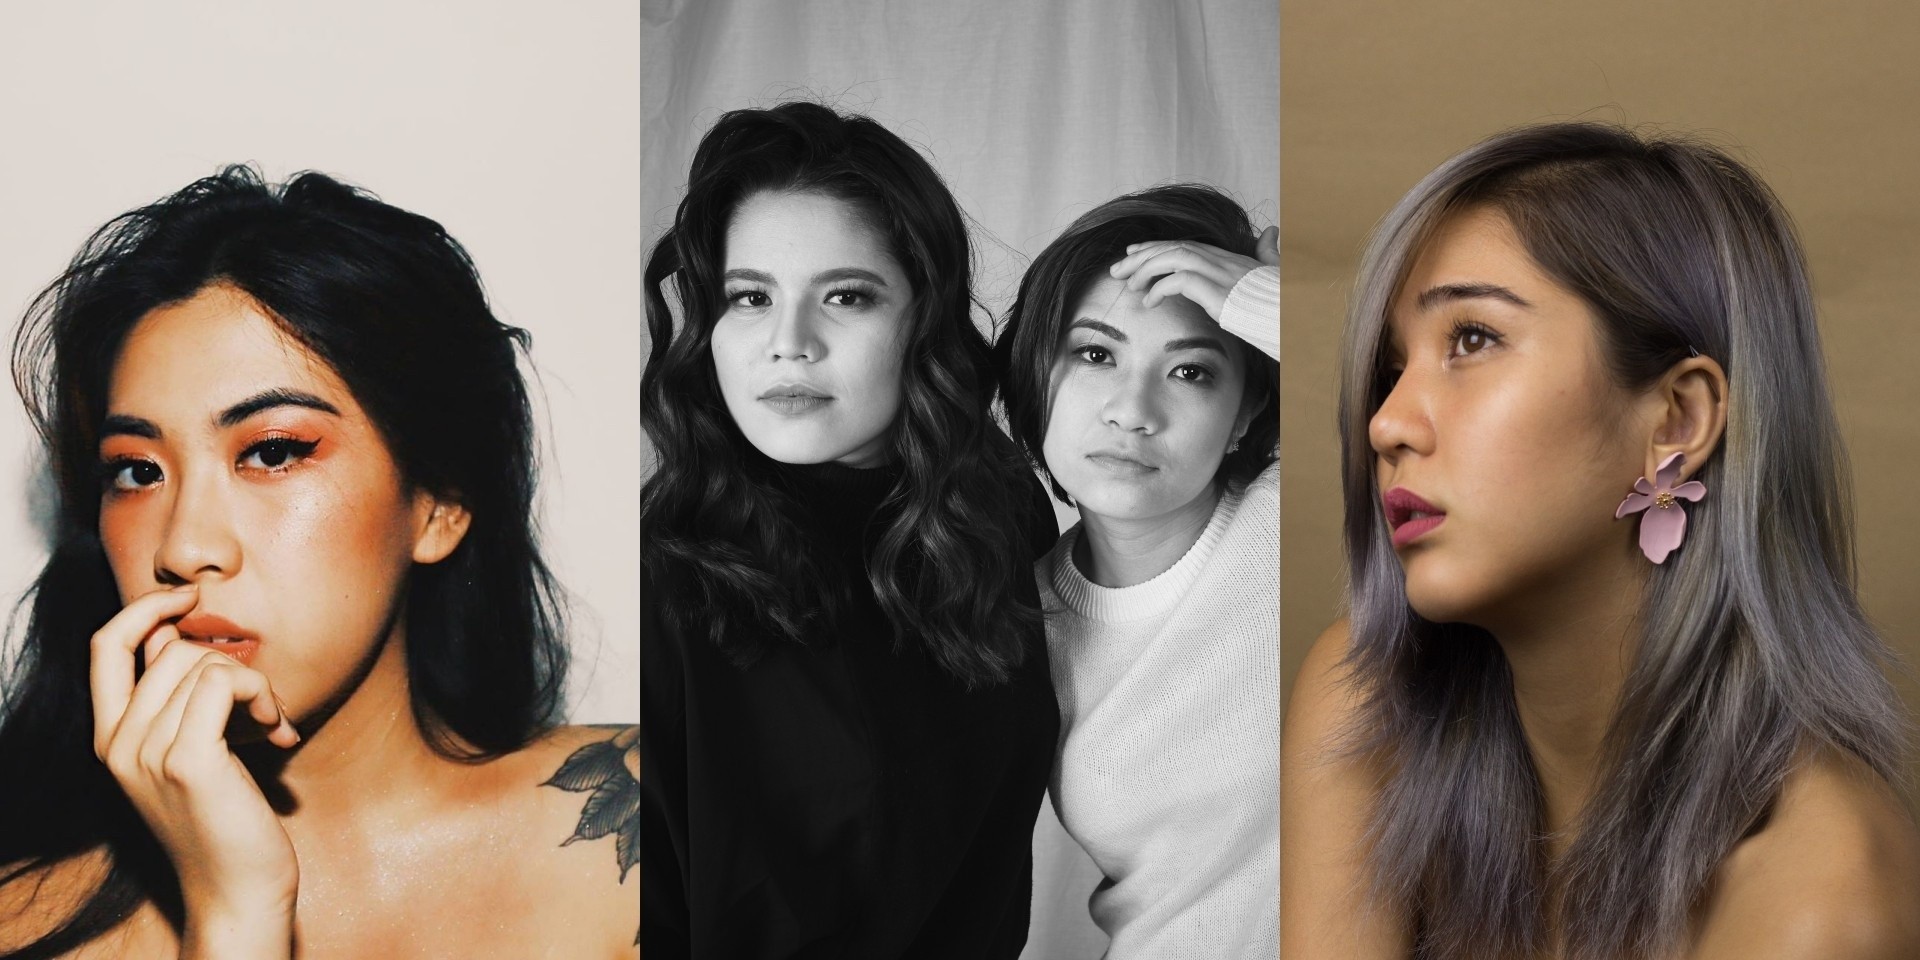 Leanne & Naara, Talitha Tan and Sam Rui to play at Marina Bay Sands' Open Stage this October